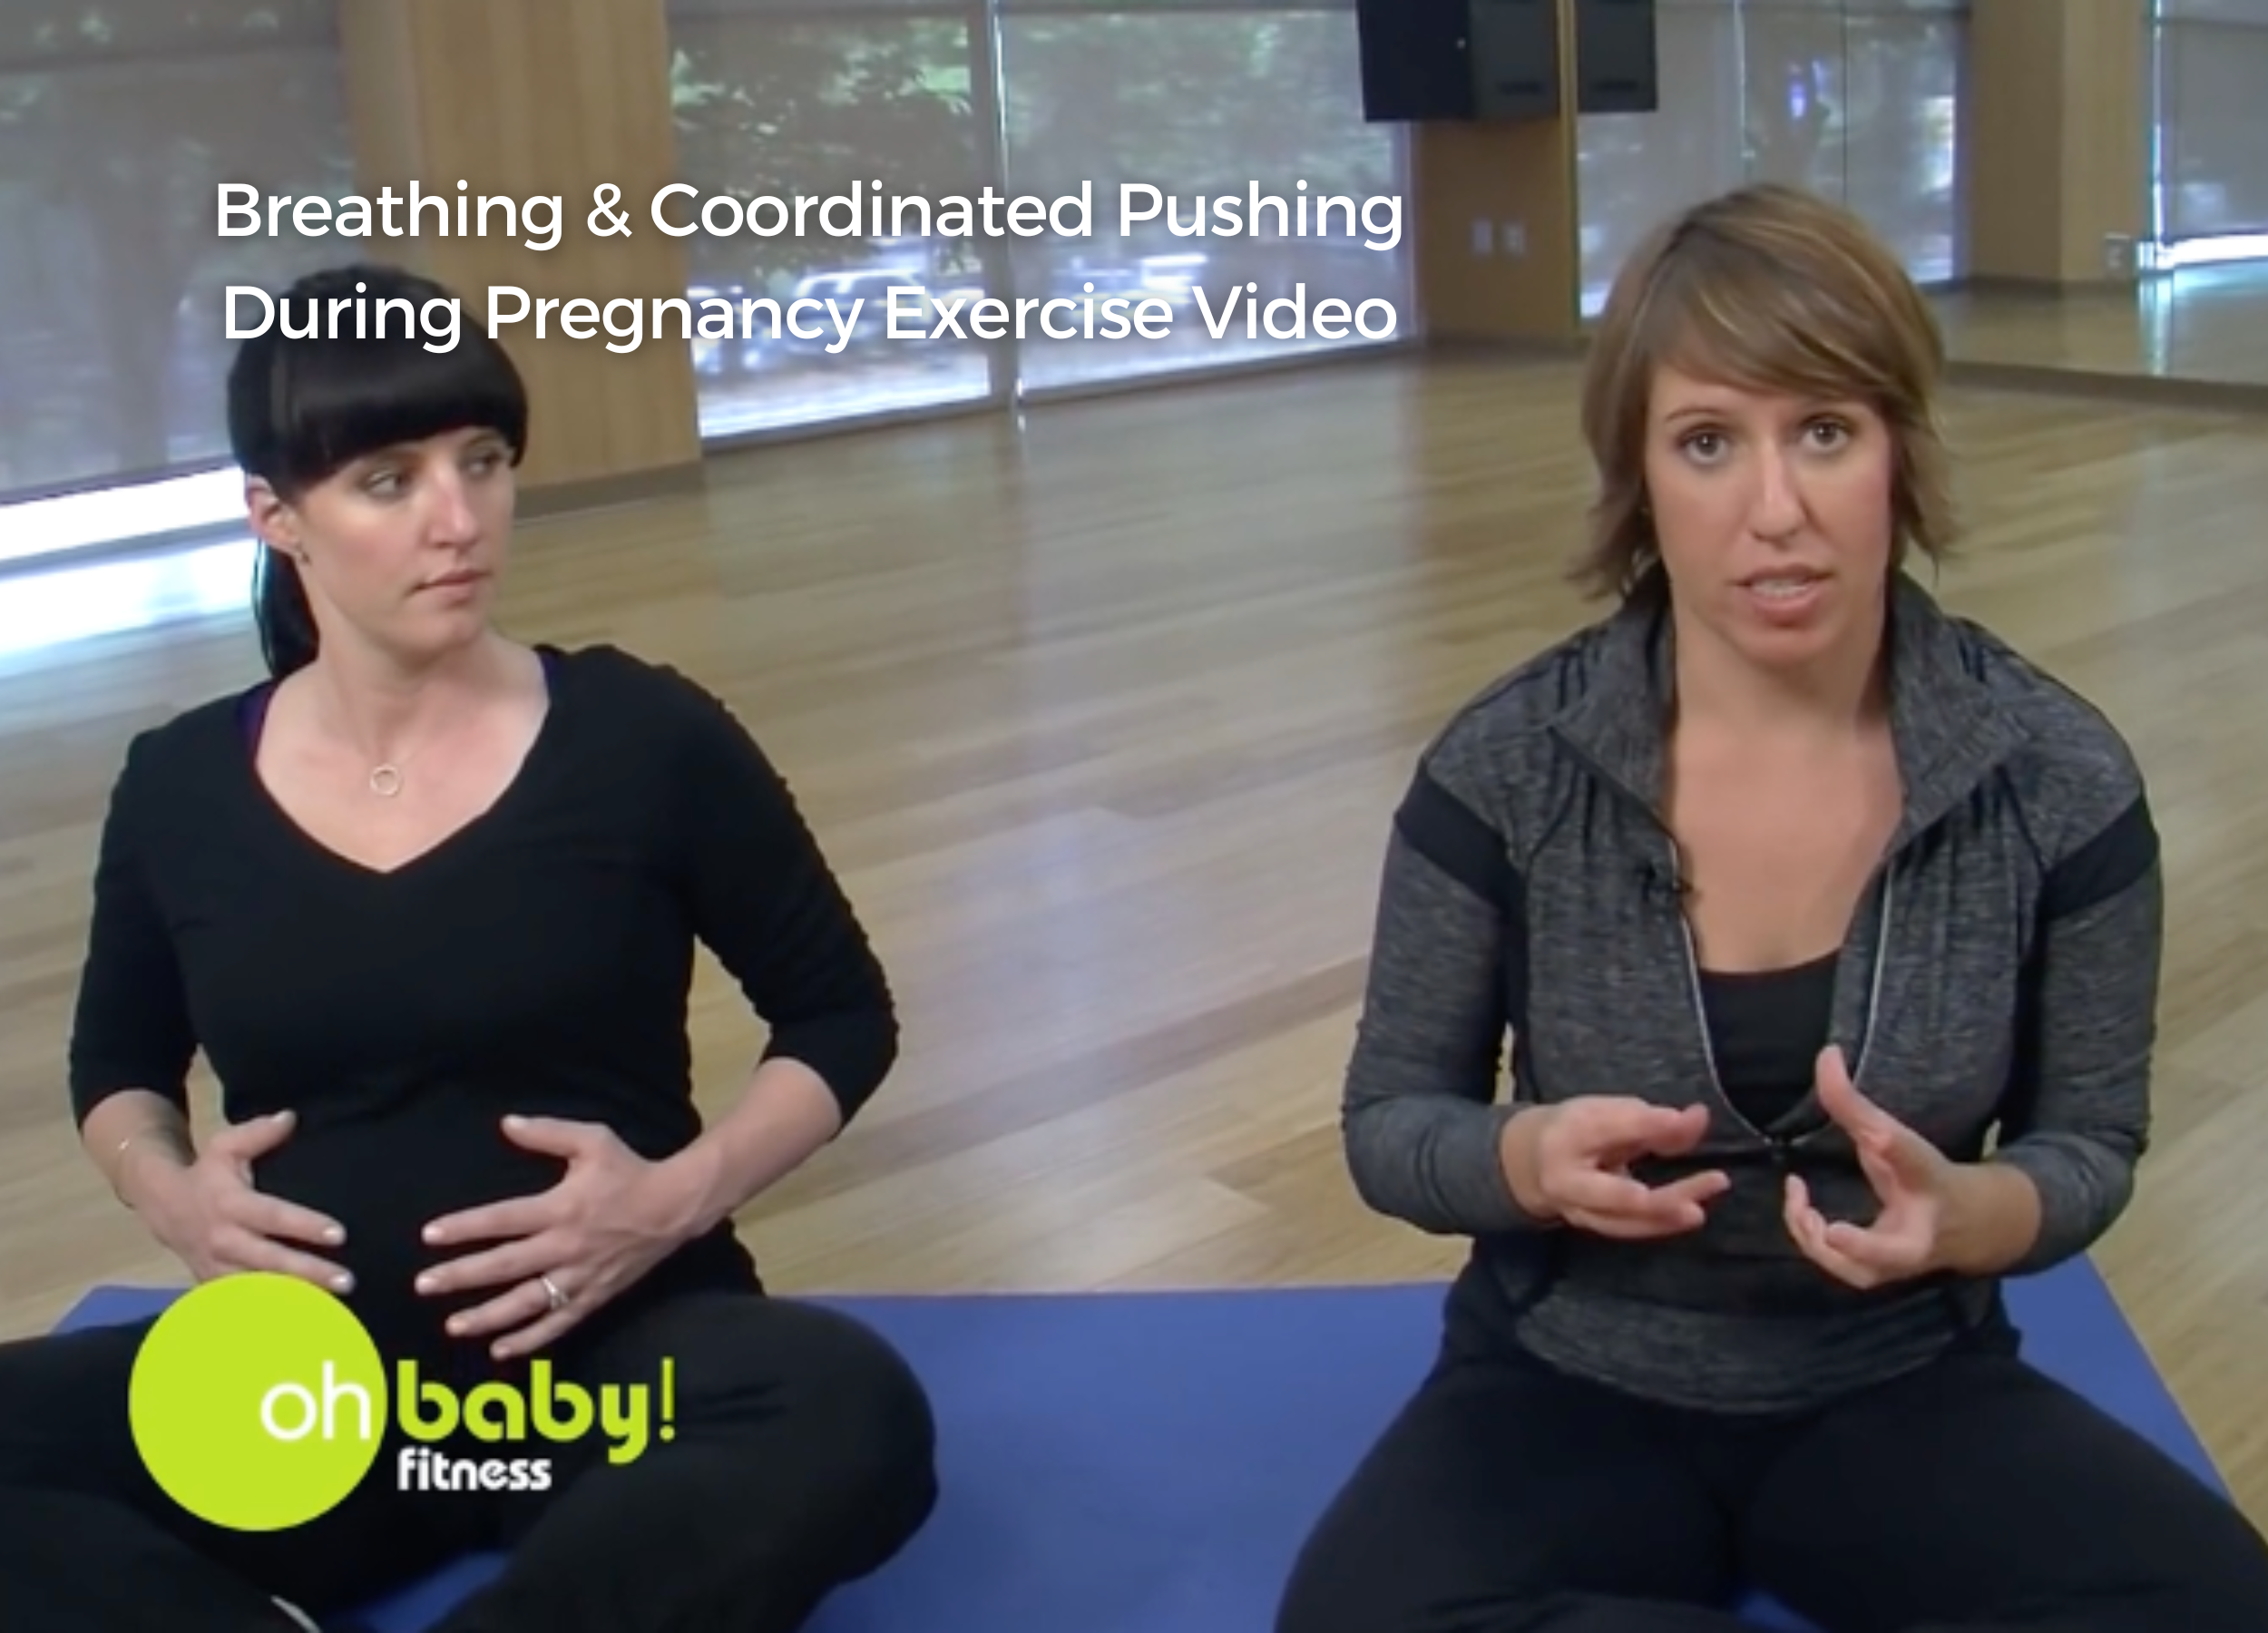 Breathing & Coordinated Pushing During Pregnancy Exercise Video